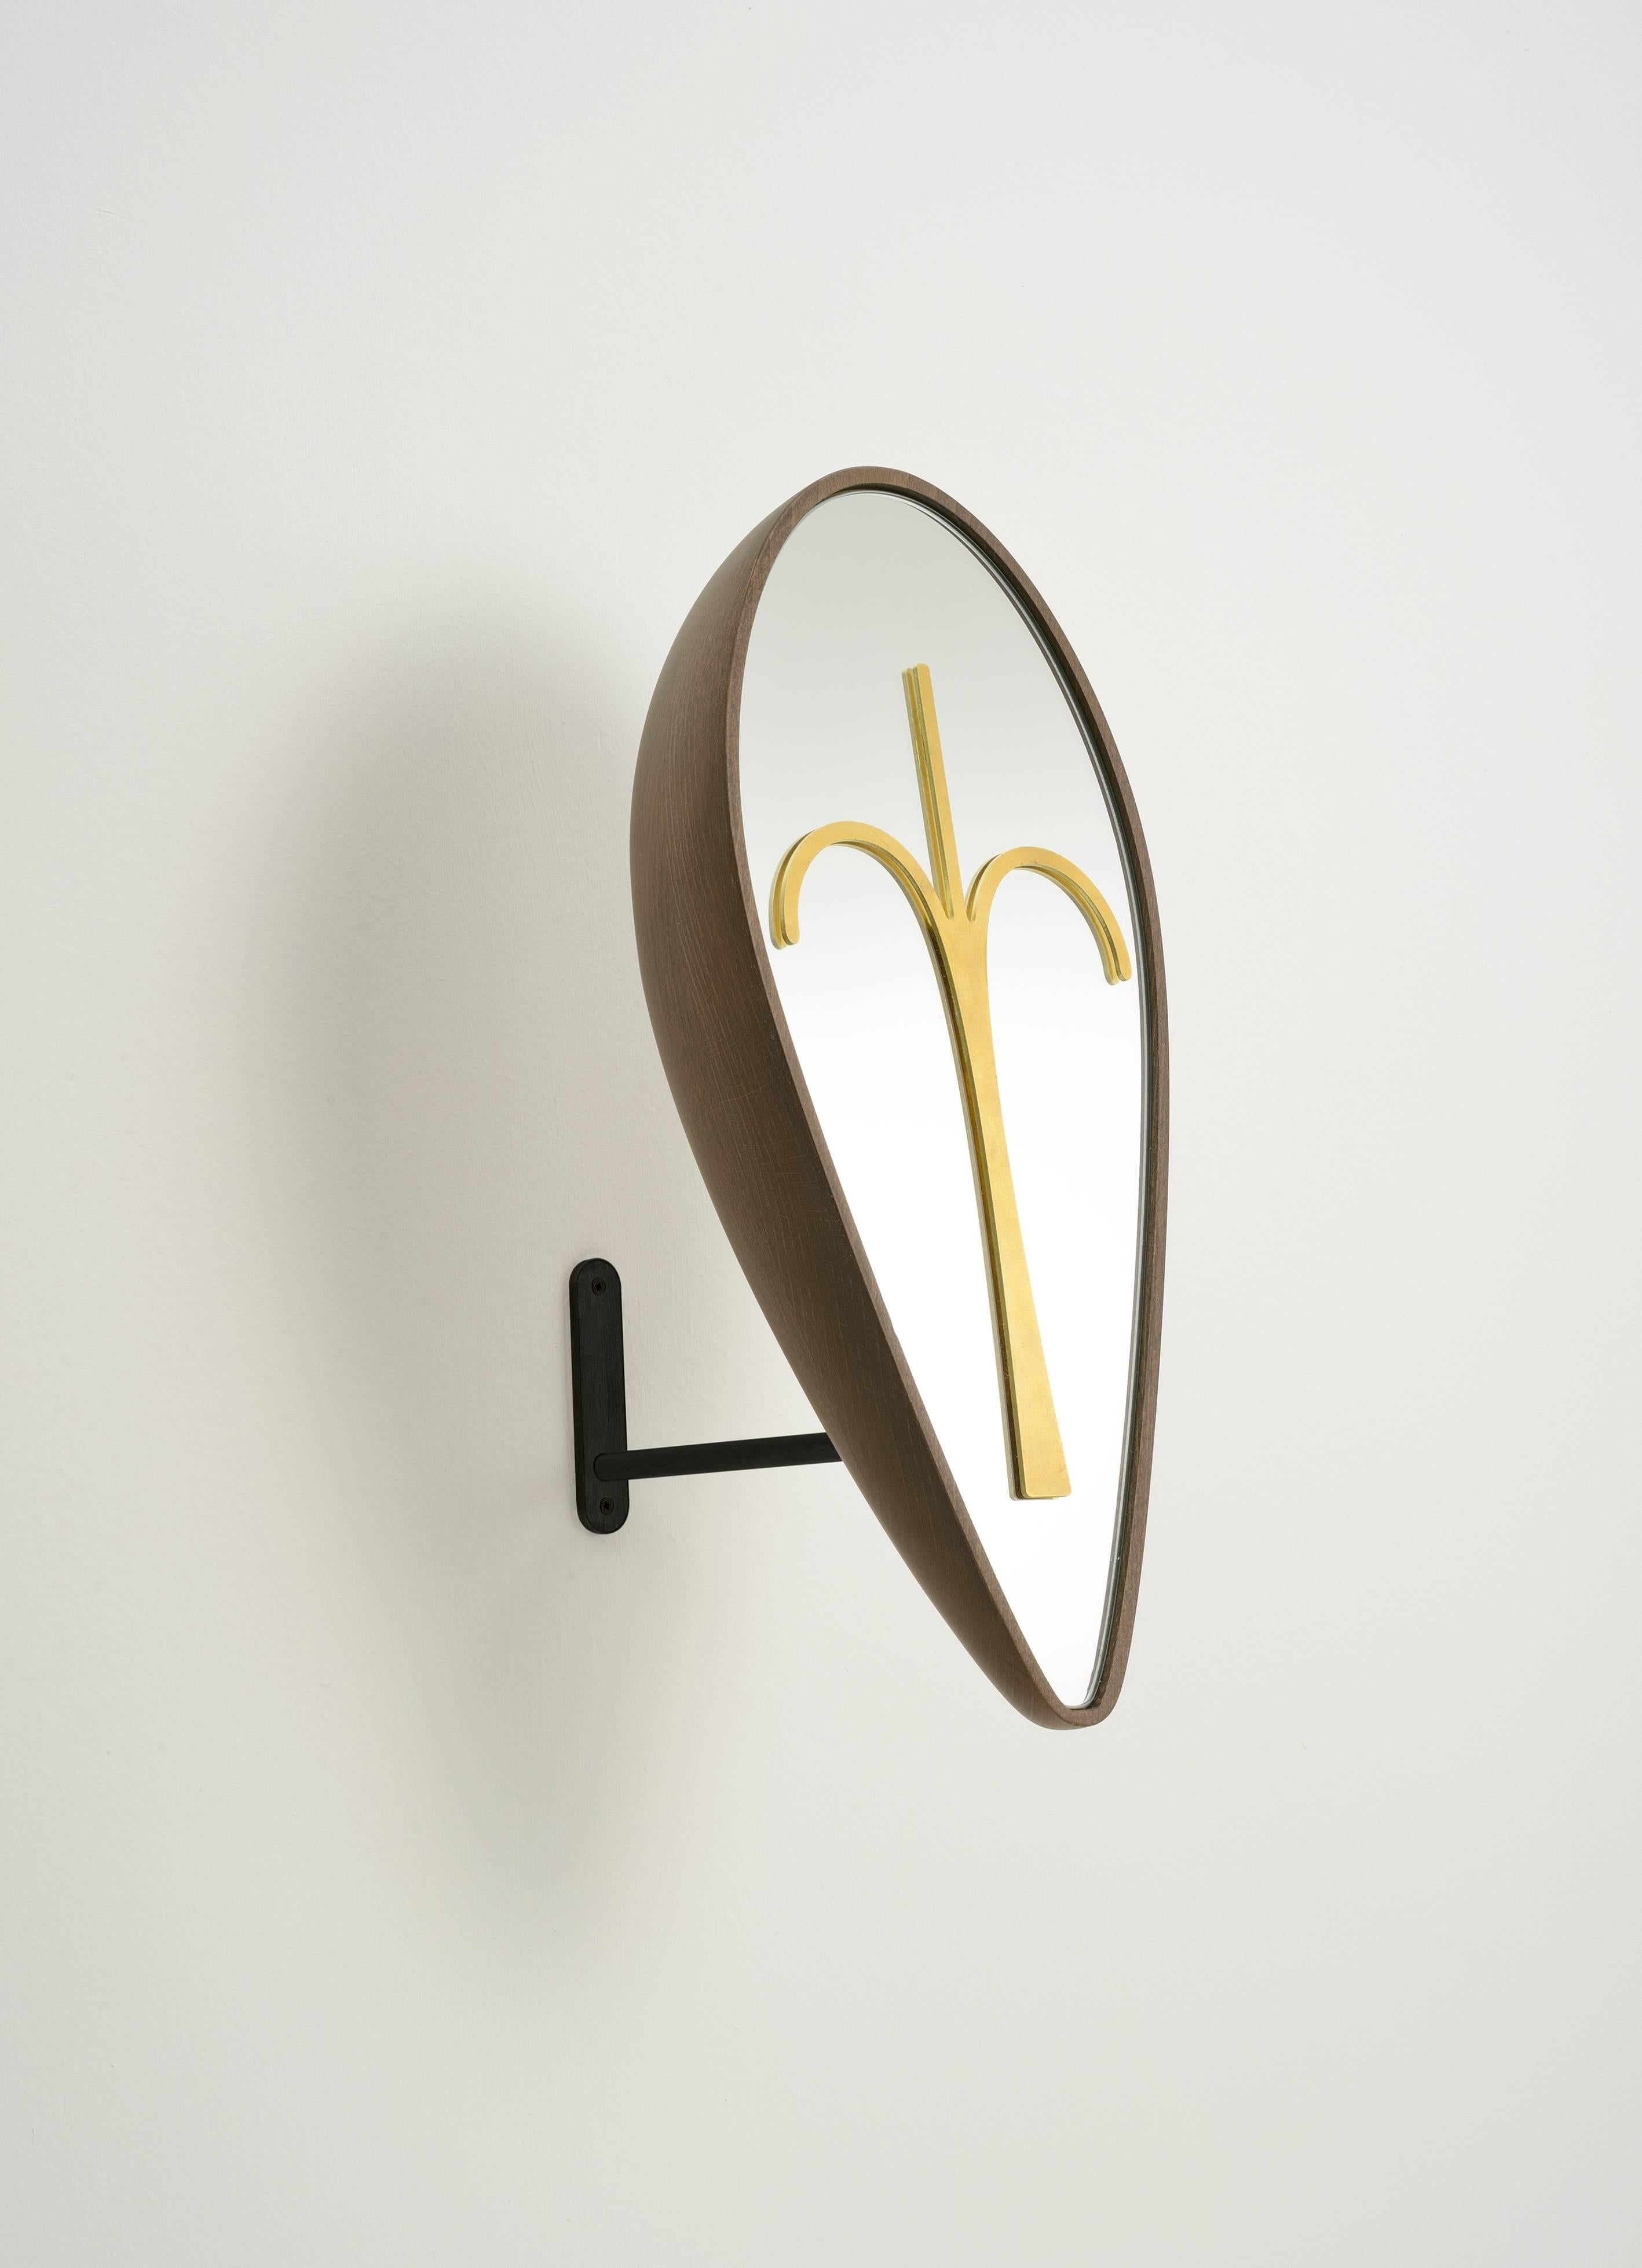 A functional mirror for a dressing room, or wooden masks and sculpture for your living or your entrance. The drop-shaped mask Bikita is made of solid beech wood stained Canaletto walnut, with a brass element on the mirror. The base is an iron stand